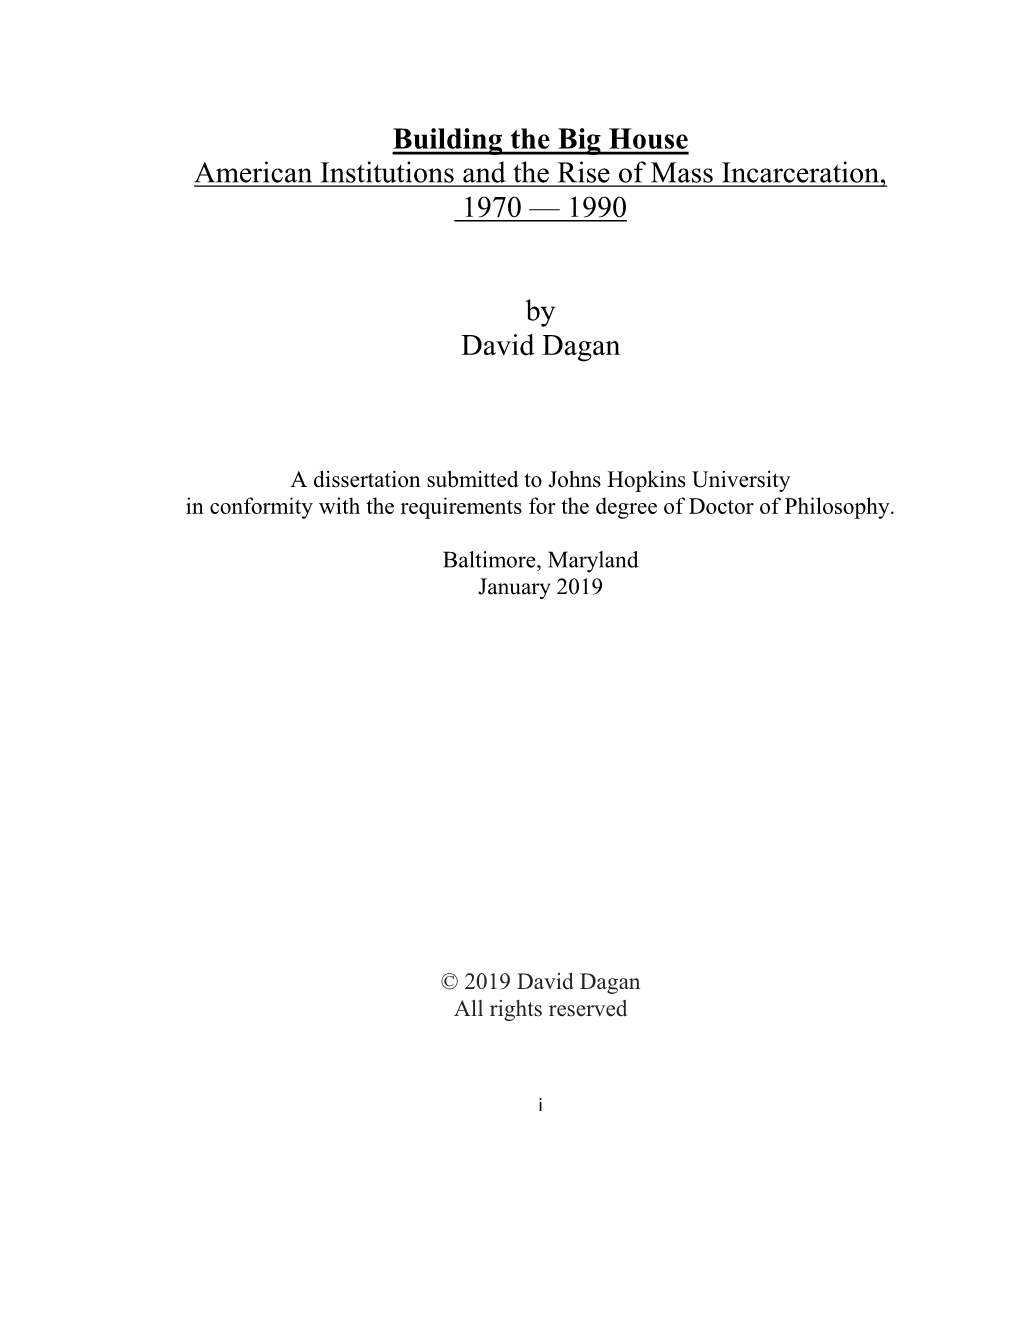 Building the Big House American Institutions and the Rise of Mass Incarceration, 1970 — 1990